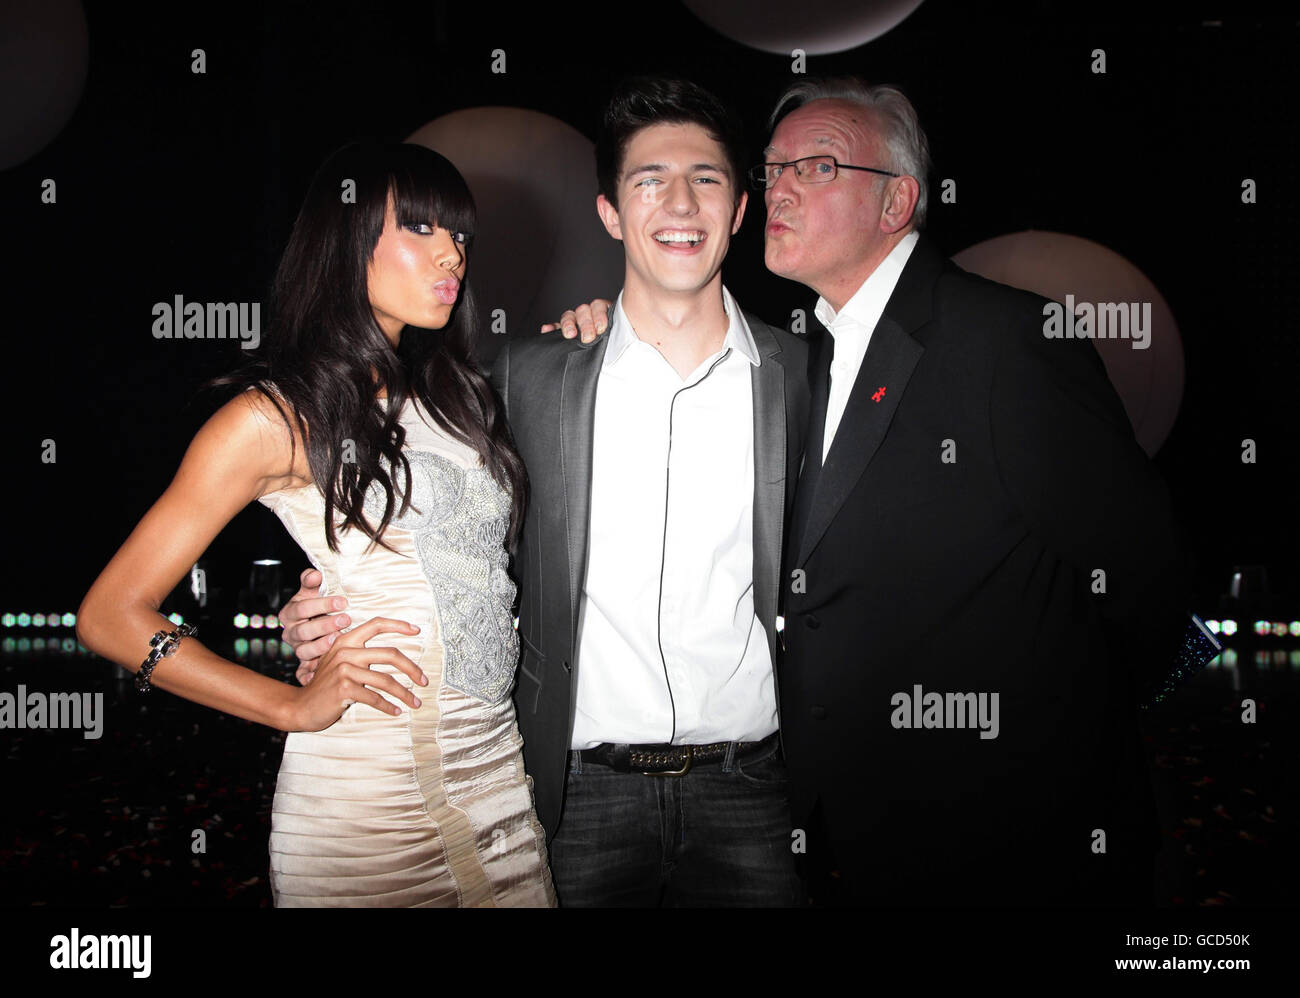 Judges Pete Waterman and Jade Ewen congratulate Josh Dubovie, 19, from Basildon, who won BBC1's 'Eurovision: Your Country Needs You' to represent the UK with the Mike Stock and Pete Waterman penned song 'That Sounds Good To Me' at the Eurovision Song Contest, filmed at BBC TV Centre in west London. Stock Photo